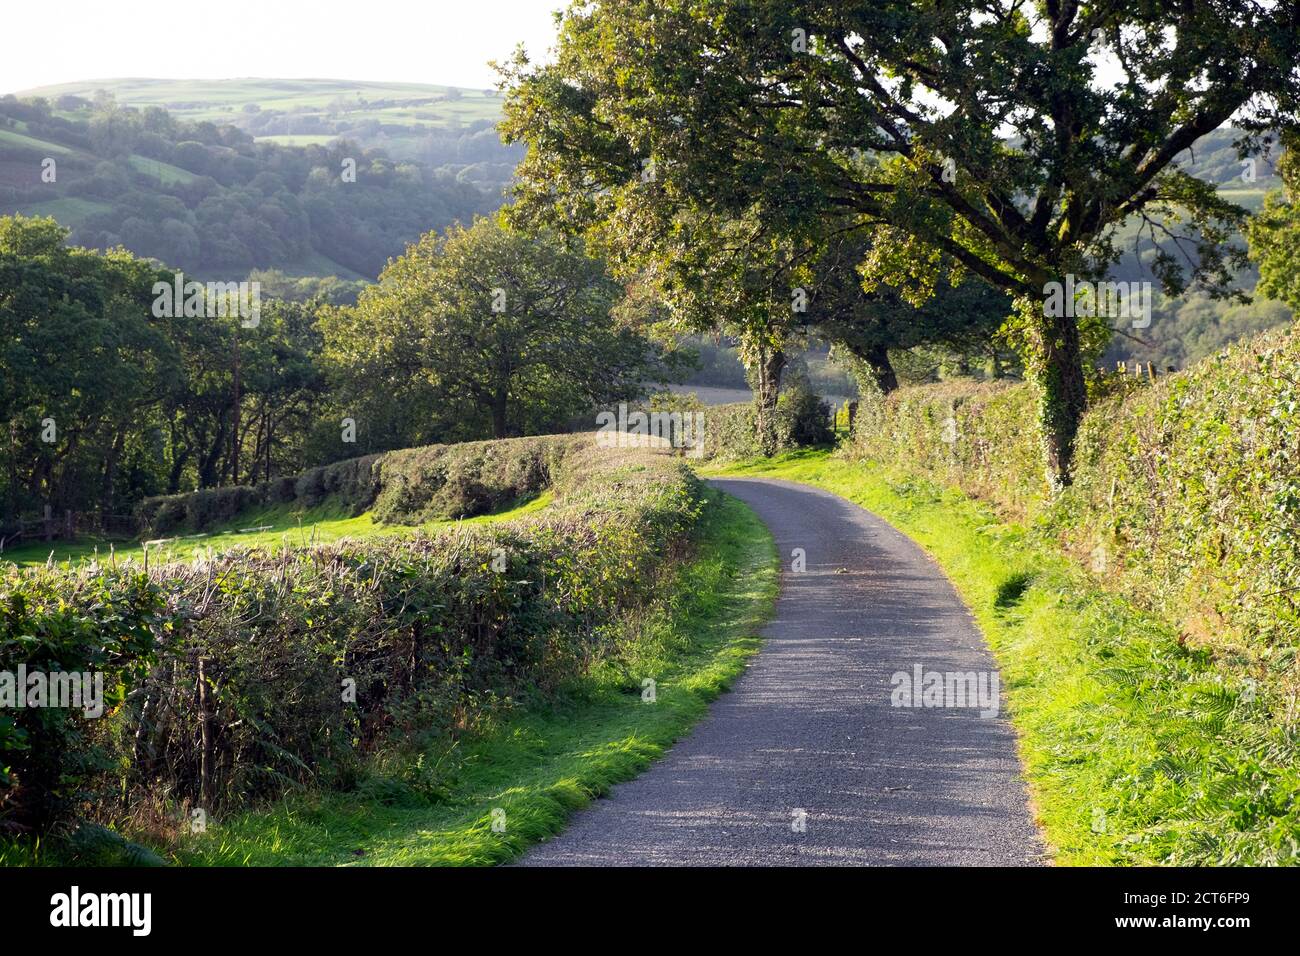 Carmarthenshire Welsh countryside landscape, trimmed hedge hedgerow, bend in road lane, trees in autumn September 2020 Wales UK BritainKATHY DEWITT Stock Photo